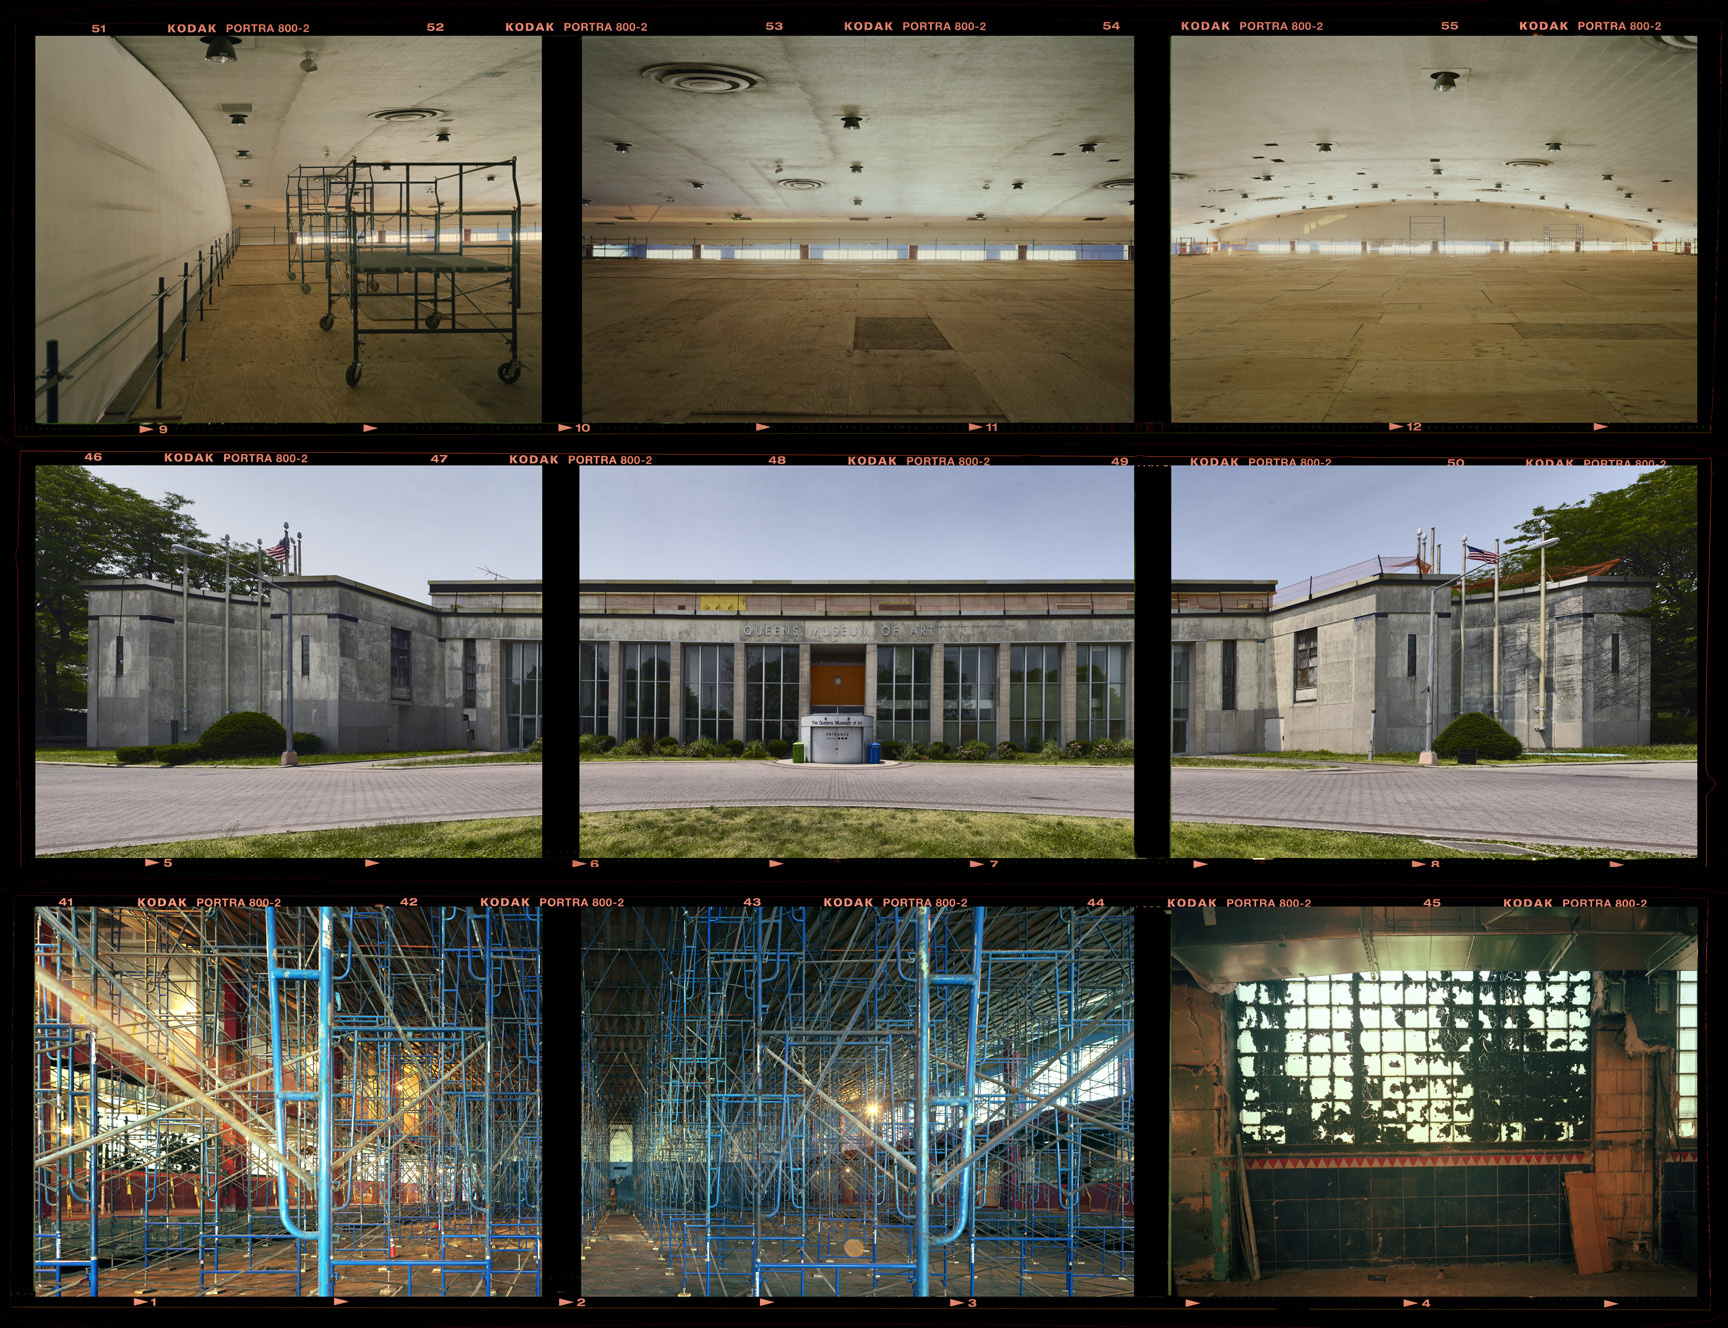 A three by three, gridded Kodak film strip capturing the redevelopment of the New York City Building. The top row captures the empty interiors of the building. The second row captures an outside view of the building. The third row captures another inter shot of a space filled with blue scaffolding. 